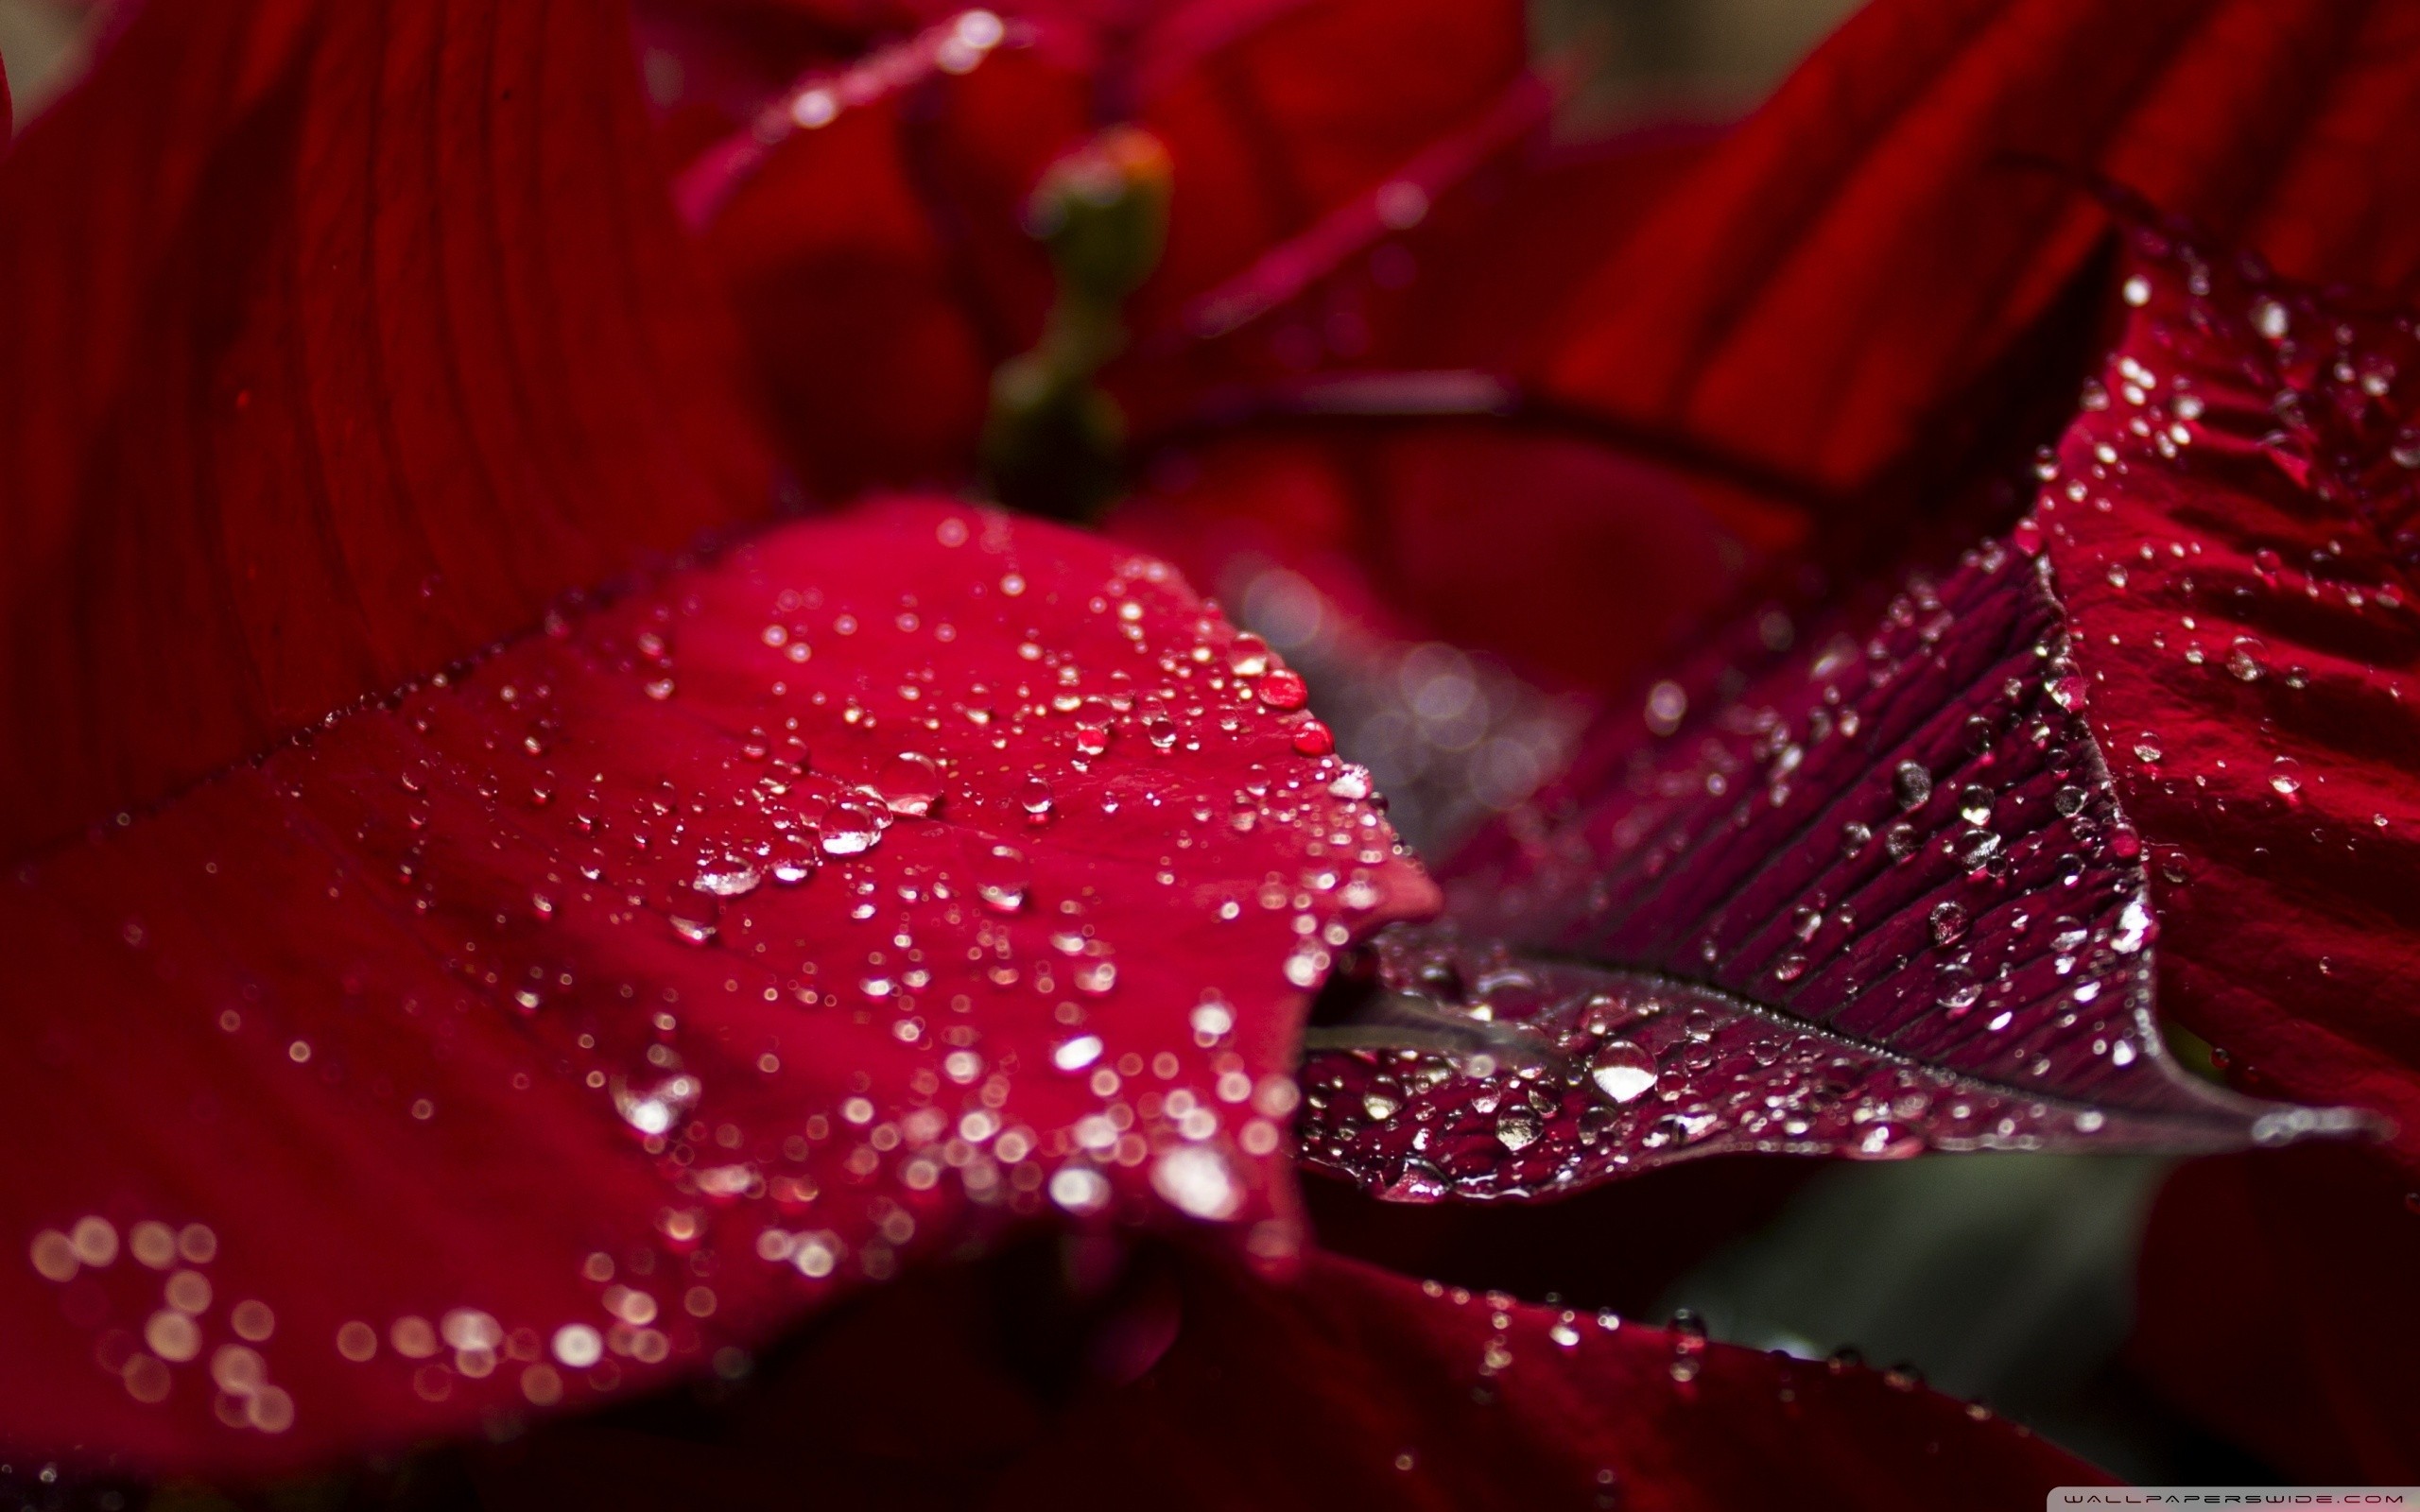 General 2560x1600 nature photography leaves red leaves water drops closeup plants